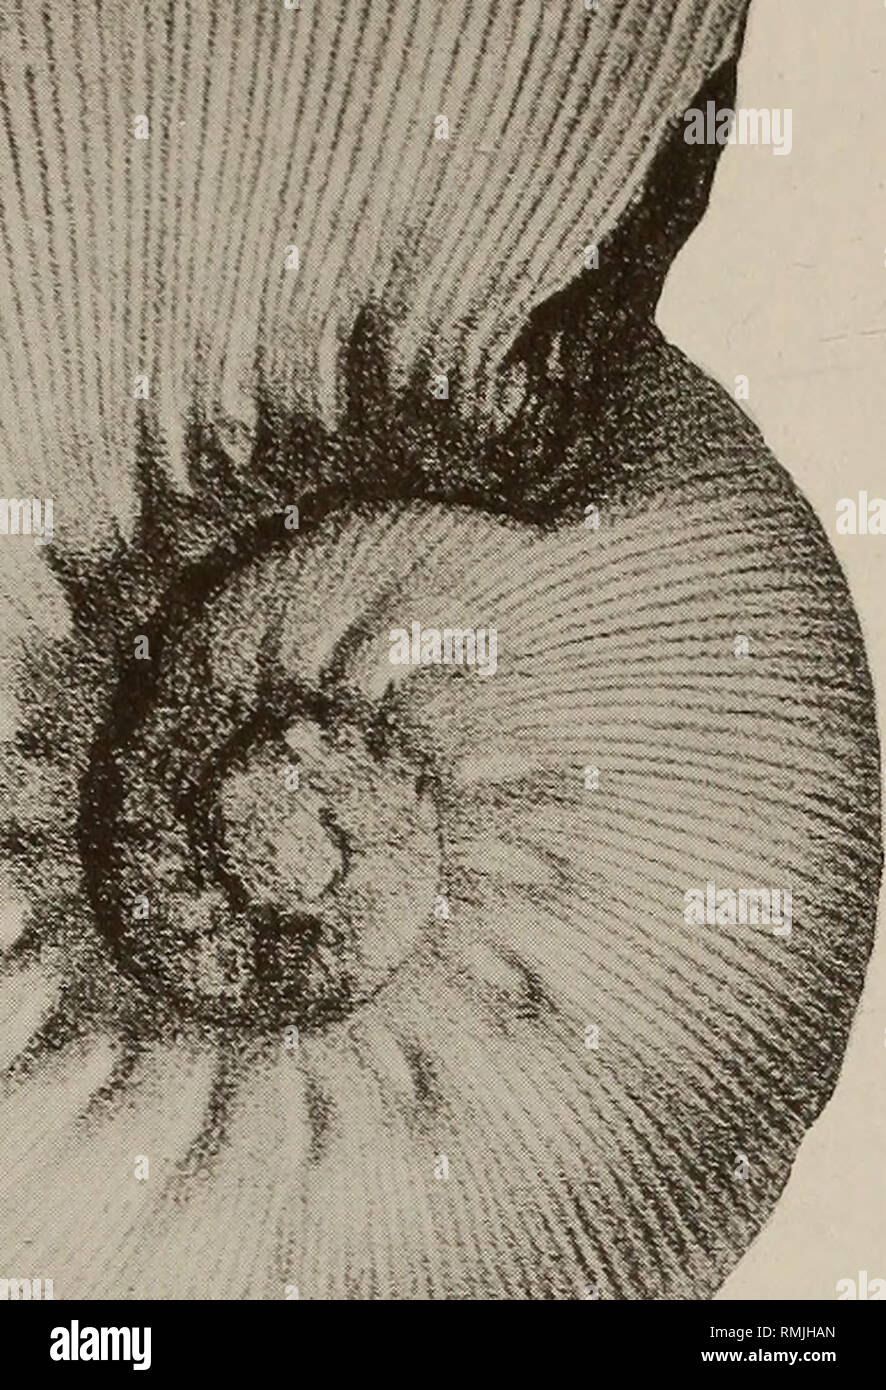 . Annals of the South African Museum = Annale van die Suid-Afrikaanse Museum. Natural history. REVISION OF LATE VALANGINIAN CEPHALOPODA 327 --tffiliWflffk. Fig. 177. Olcostephanus {Olcostephanus) filosus (Baumberger) (after Bayle 1878), x 1. Olcostephanus elongatus (Tzankov) (Fig. 175) is based upon a strongly compressed, crushed juvenile only 20 mm in diameter. There are about 20 primaries on the outer whorl which terminate in bullae on the umbilical shoulder, from which arise 4-5 prorsiradiate secondaries, some of which occasionally bifurcate. Parabolae are lacking and the outer whorl shows  Stock Photo